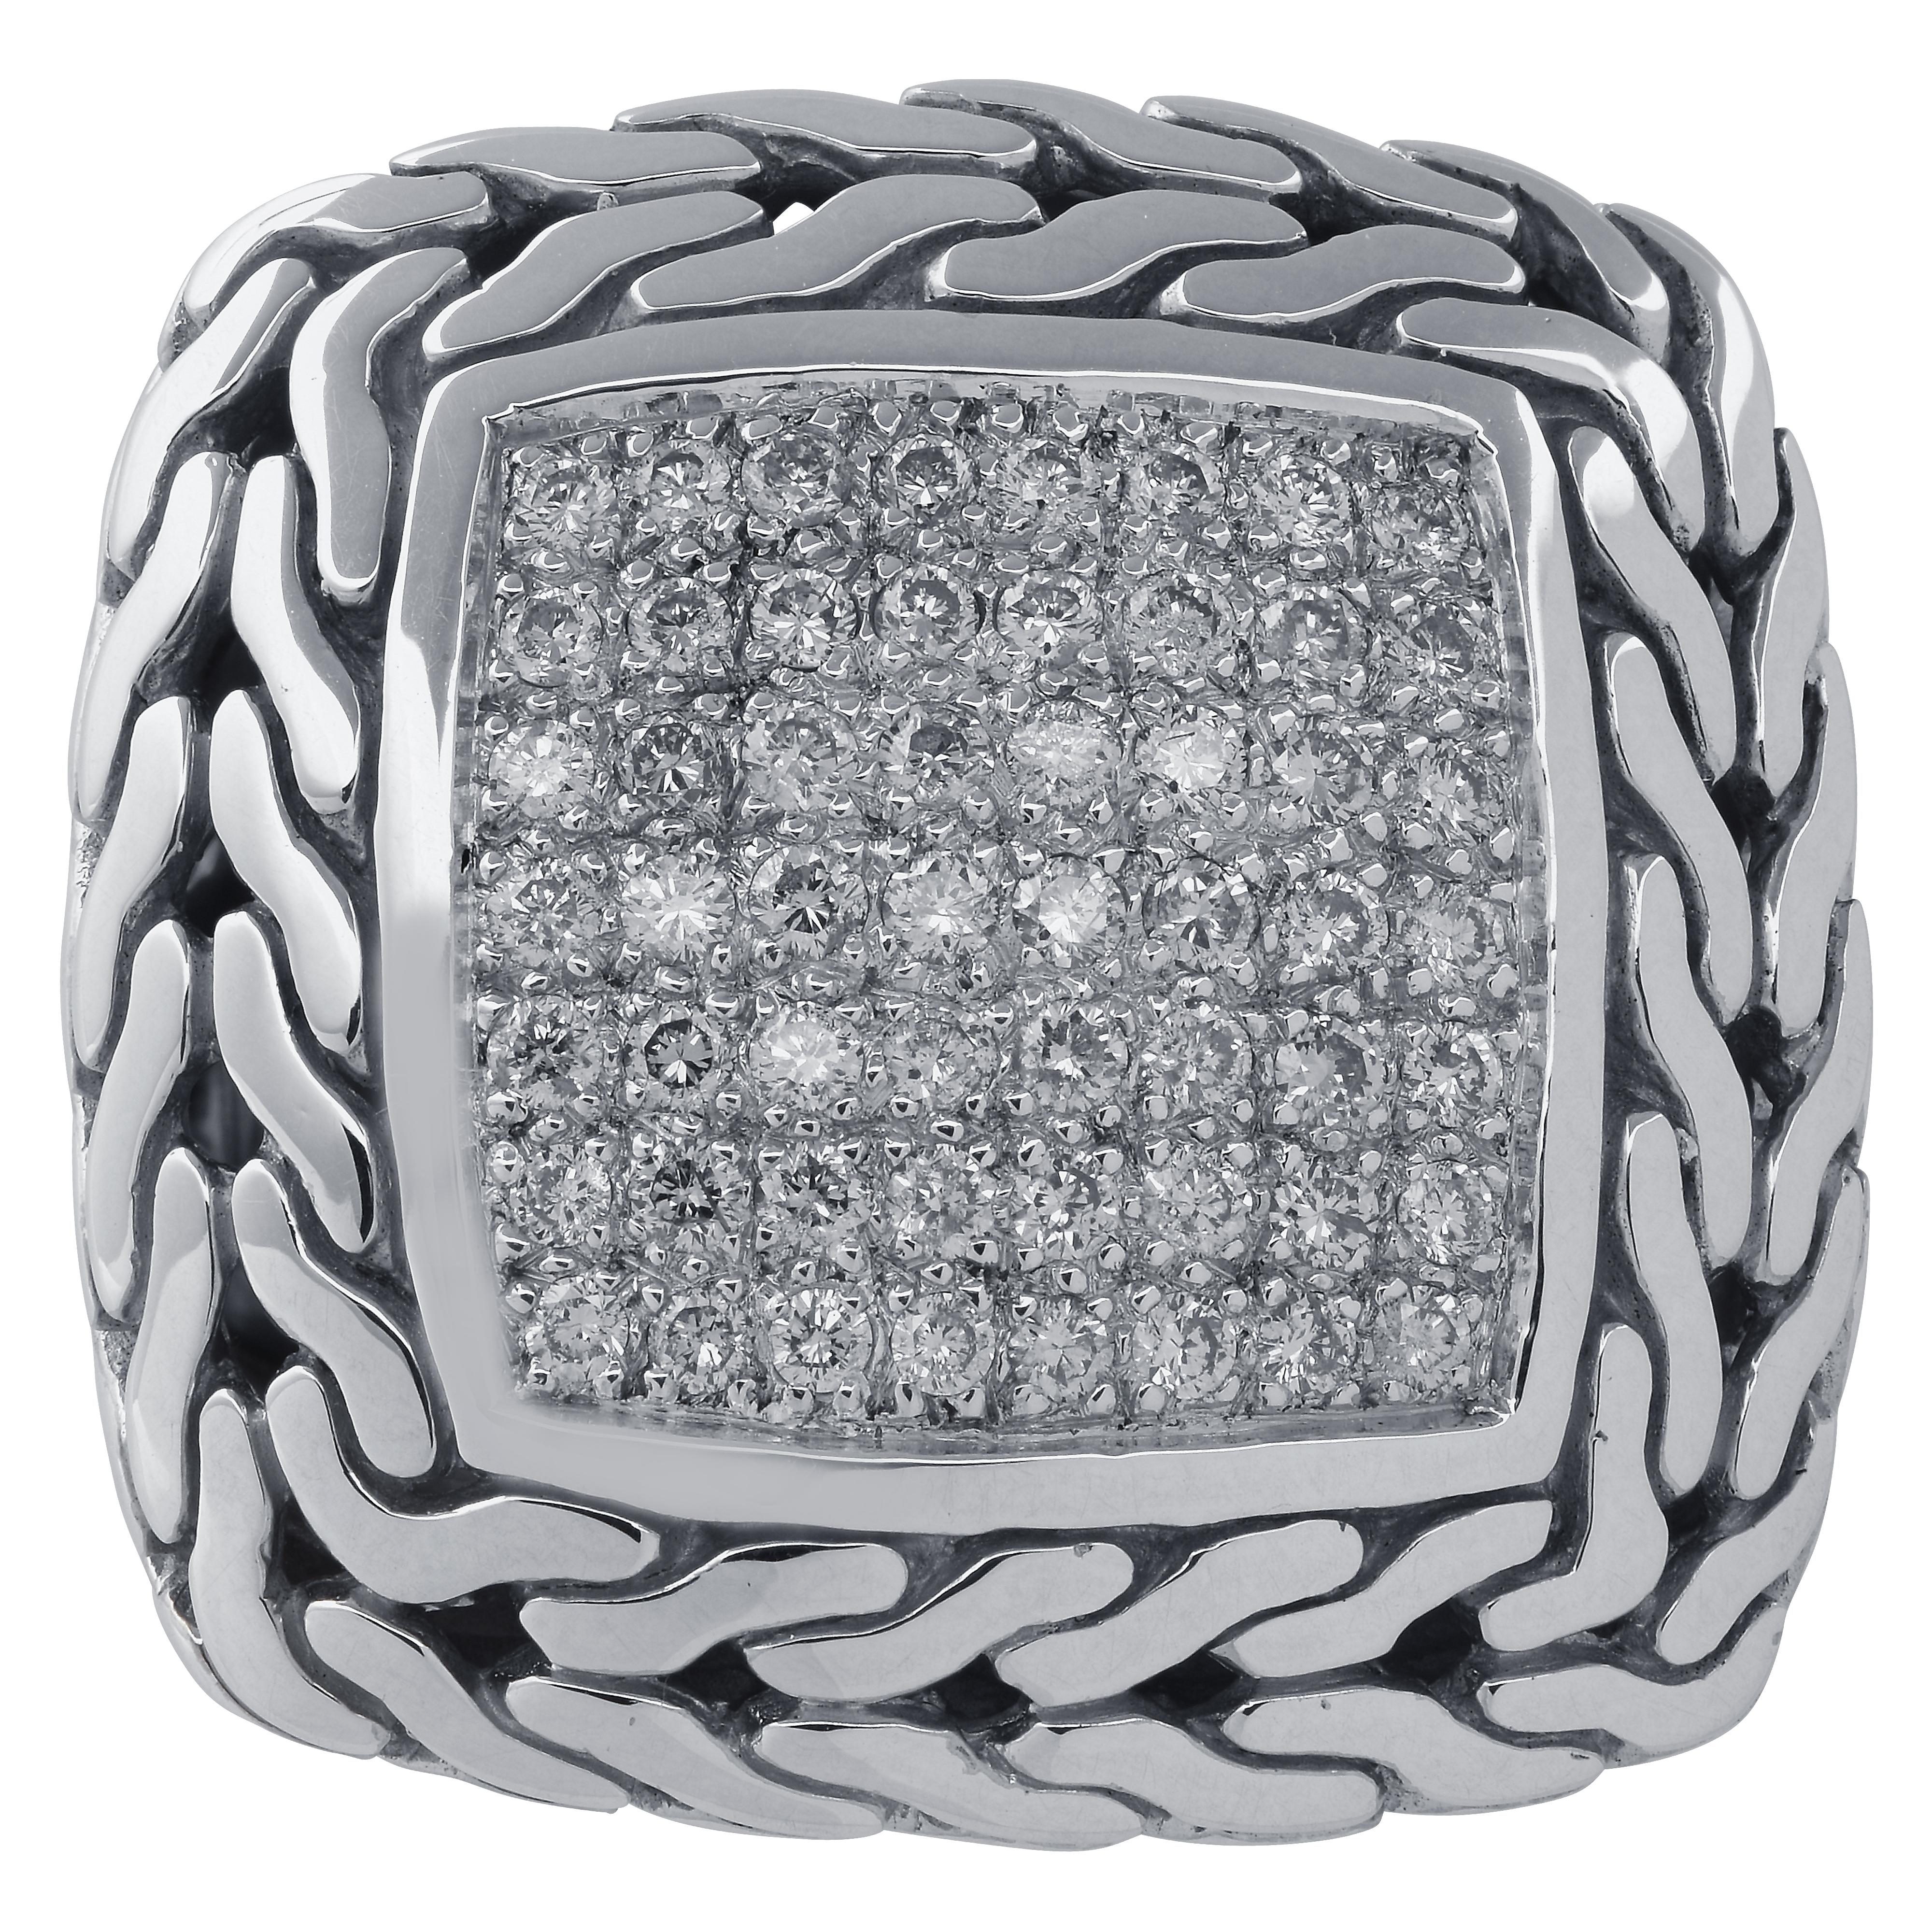 John Hardy Pave Classic Chain Ring crafted in 18k white gold and Silver featuring 56 round brilliant cut diamonds weighing approximately .56cts total G color SI clarity. 56 diamonds are pave set in a square shape, framed with a hand-carved